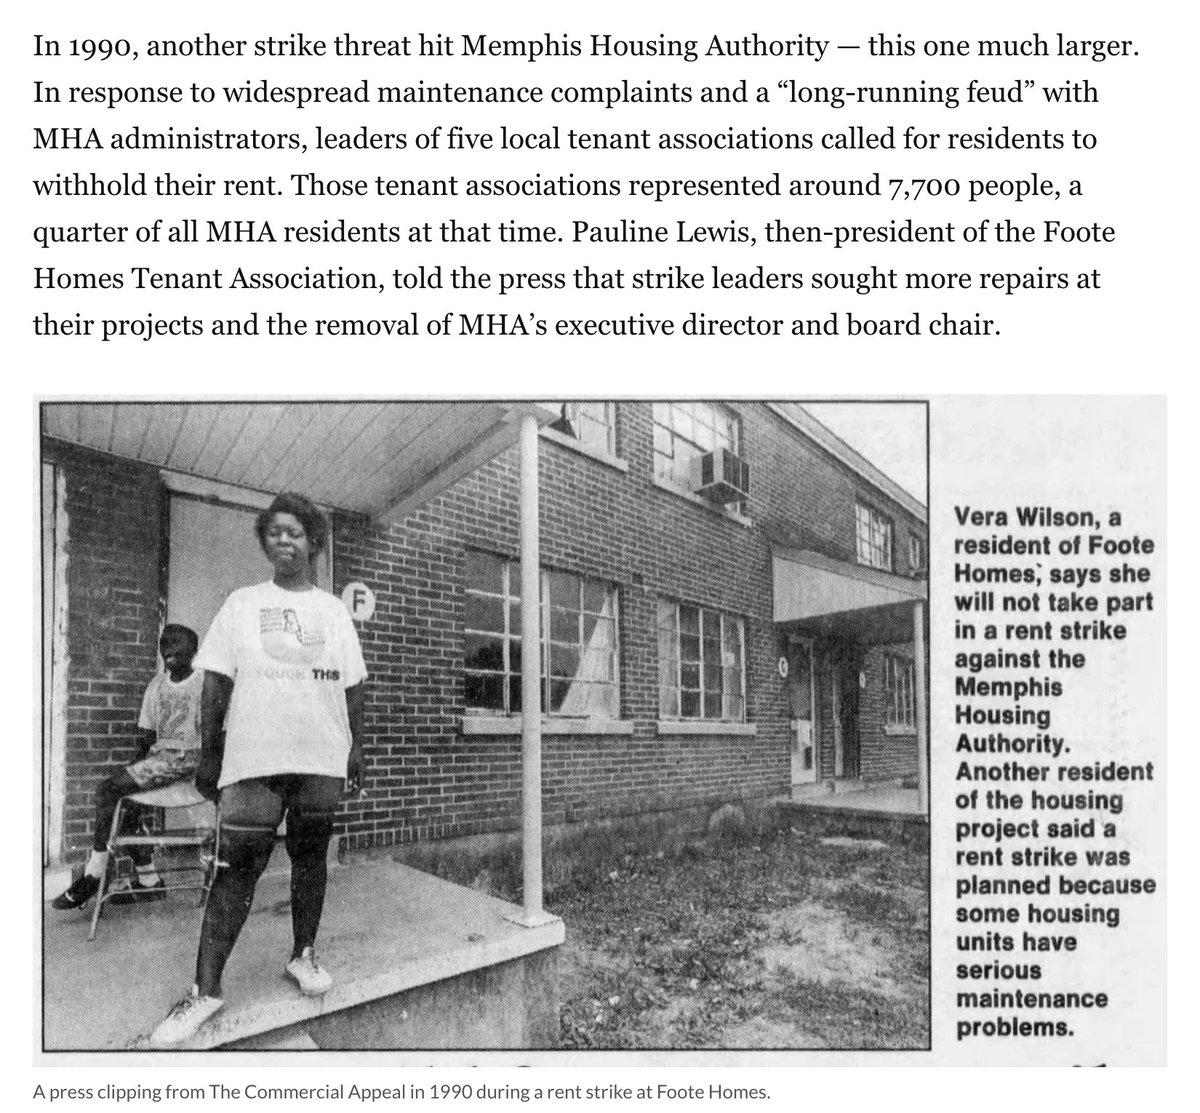 When Memphis renters have turned to militant tactics in the past, the tone has felt fundamentally different, but retaliation from housing officials and a lack of outside support have made tenants much less willing to risk eviction by organizing together. bit.ly/3OA84qr